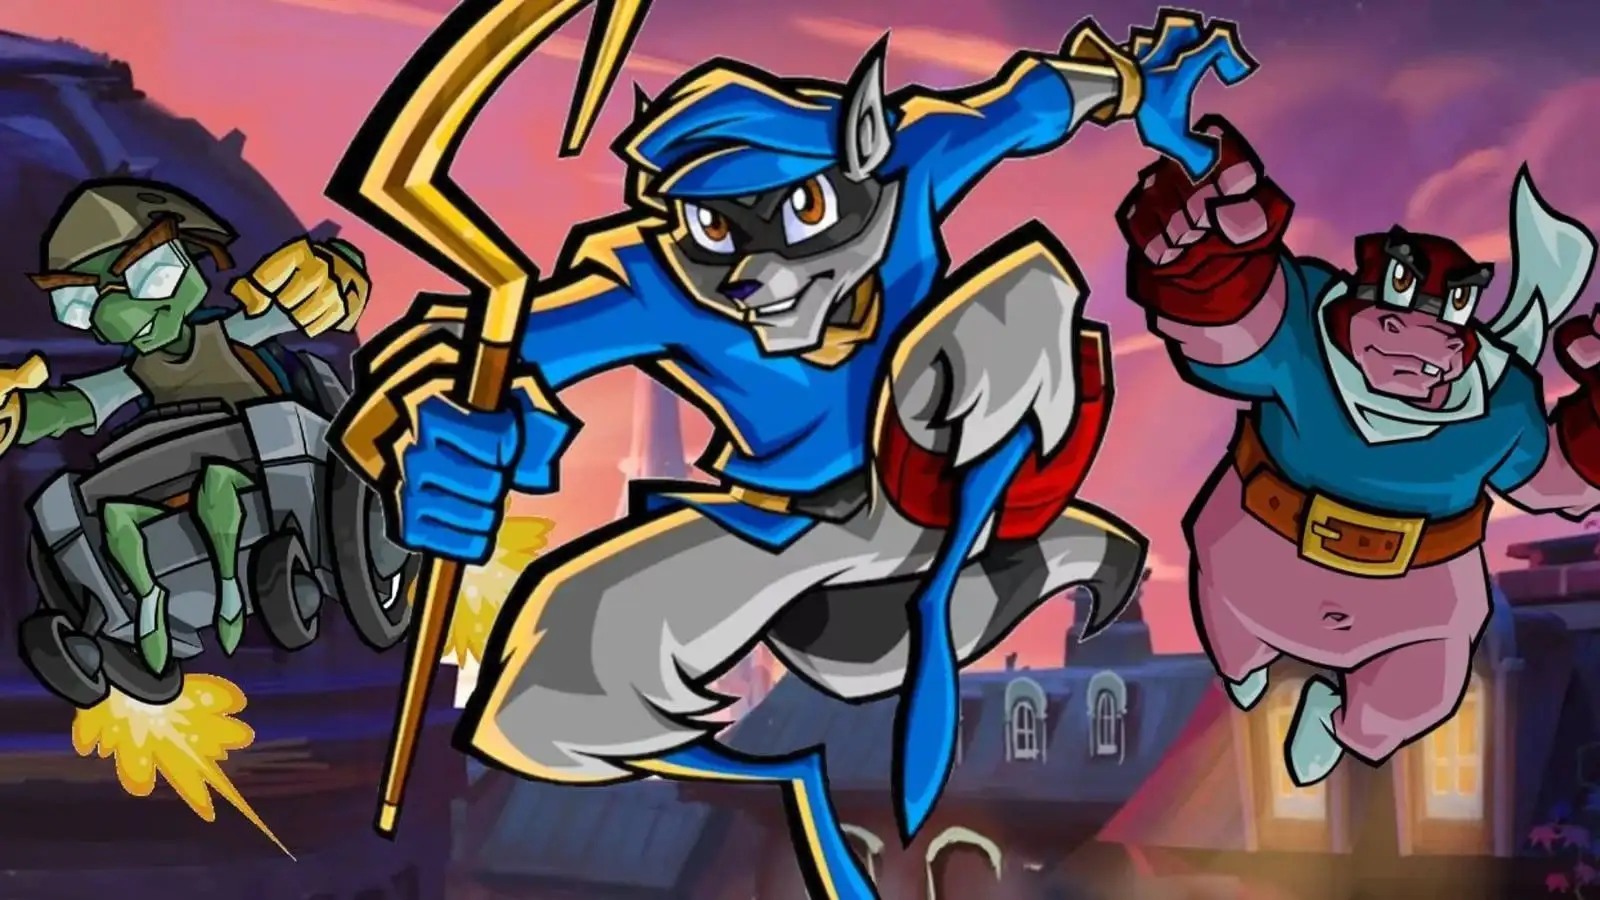 20 Later, the Sly Cooper Series Deserves More Recognition